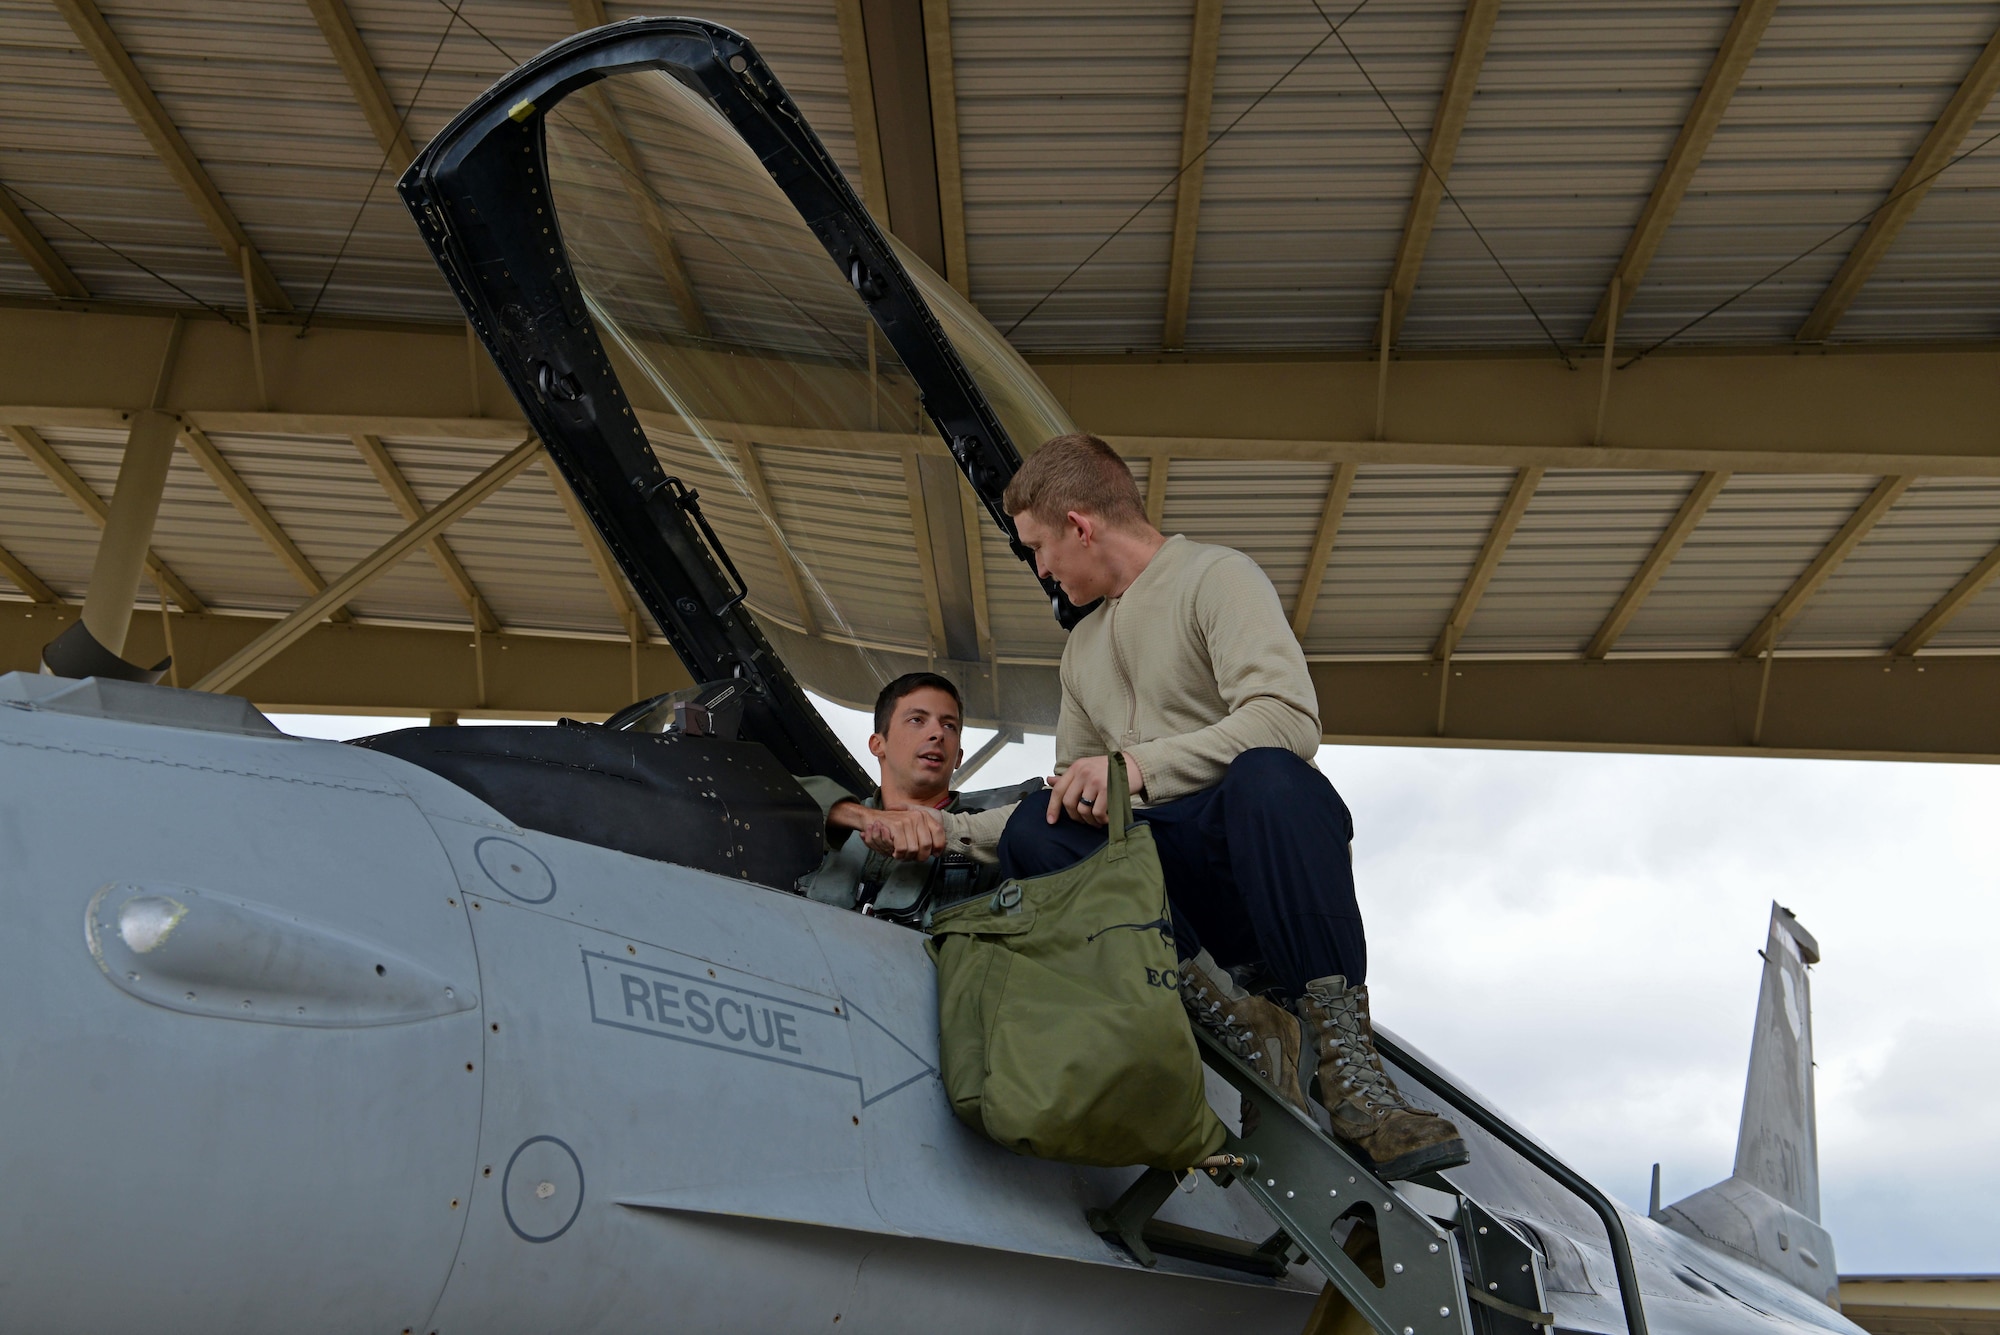 U.S. Air Force Capt. Michael Arnold, 77th Fighter Squadron pilot, shakes hands with Senior Airman Zachary Jinkins, 20th Aircraft Maintenance Squadron tactical aircraft maintainer, at Shaw Air Force Base, S.C., Dec. 14, 2016. Each F-16CM Fighting Falcon is assigned two tactical aircraft maintainers responsible for the aircraft, who are designated as the dedicated crew chief and the assistant dedicated crew chief. Tactical aircraft maintainers are often referred to as crew chiefs. (U.S. Air Force photo by Airman 1st Class Destinee Sweeney)